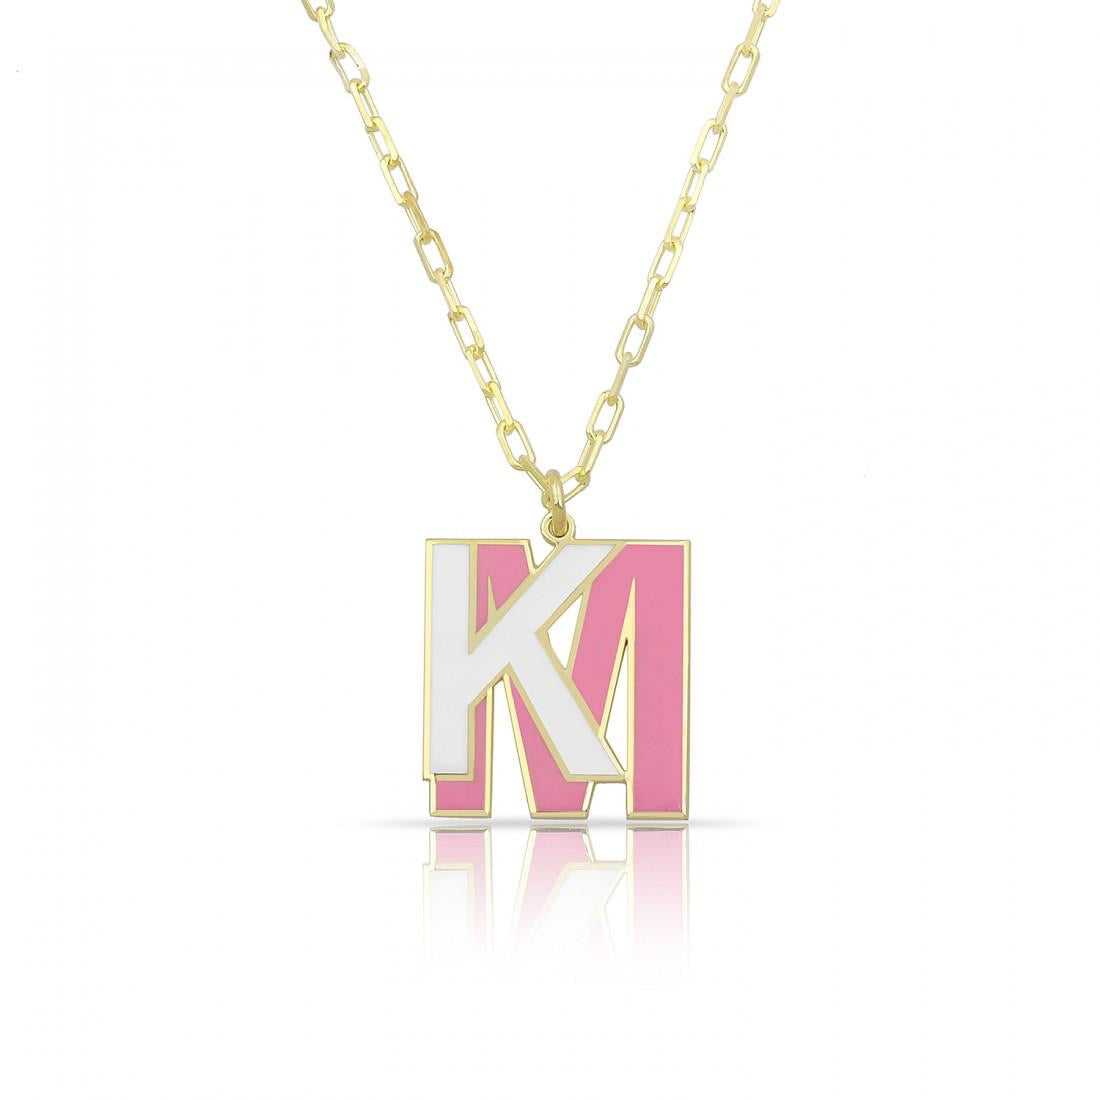 Jenna Two Letter Enamel Initials Necklace